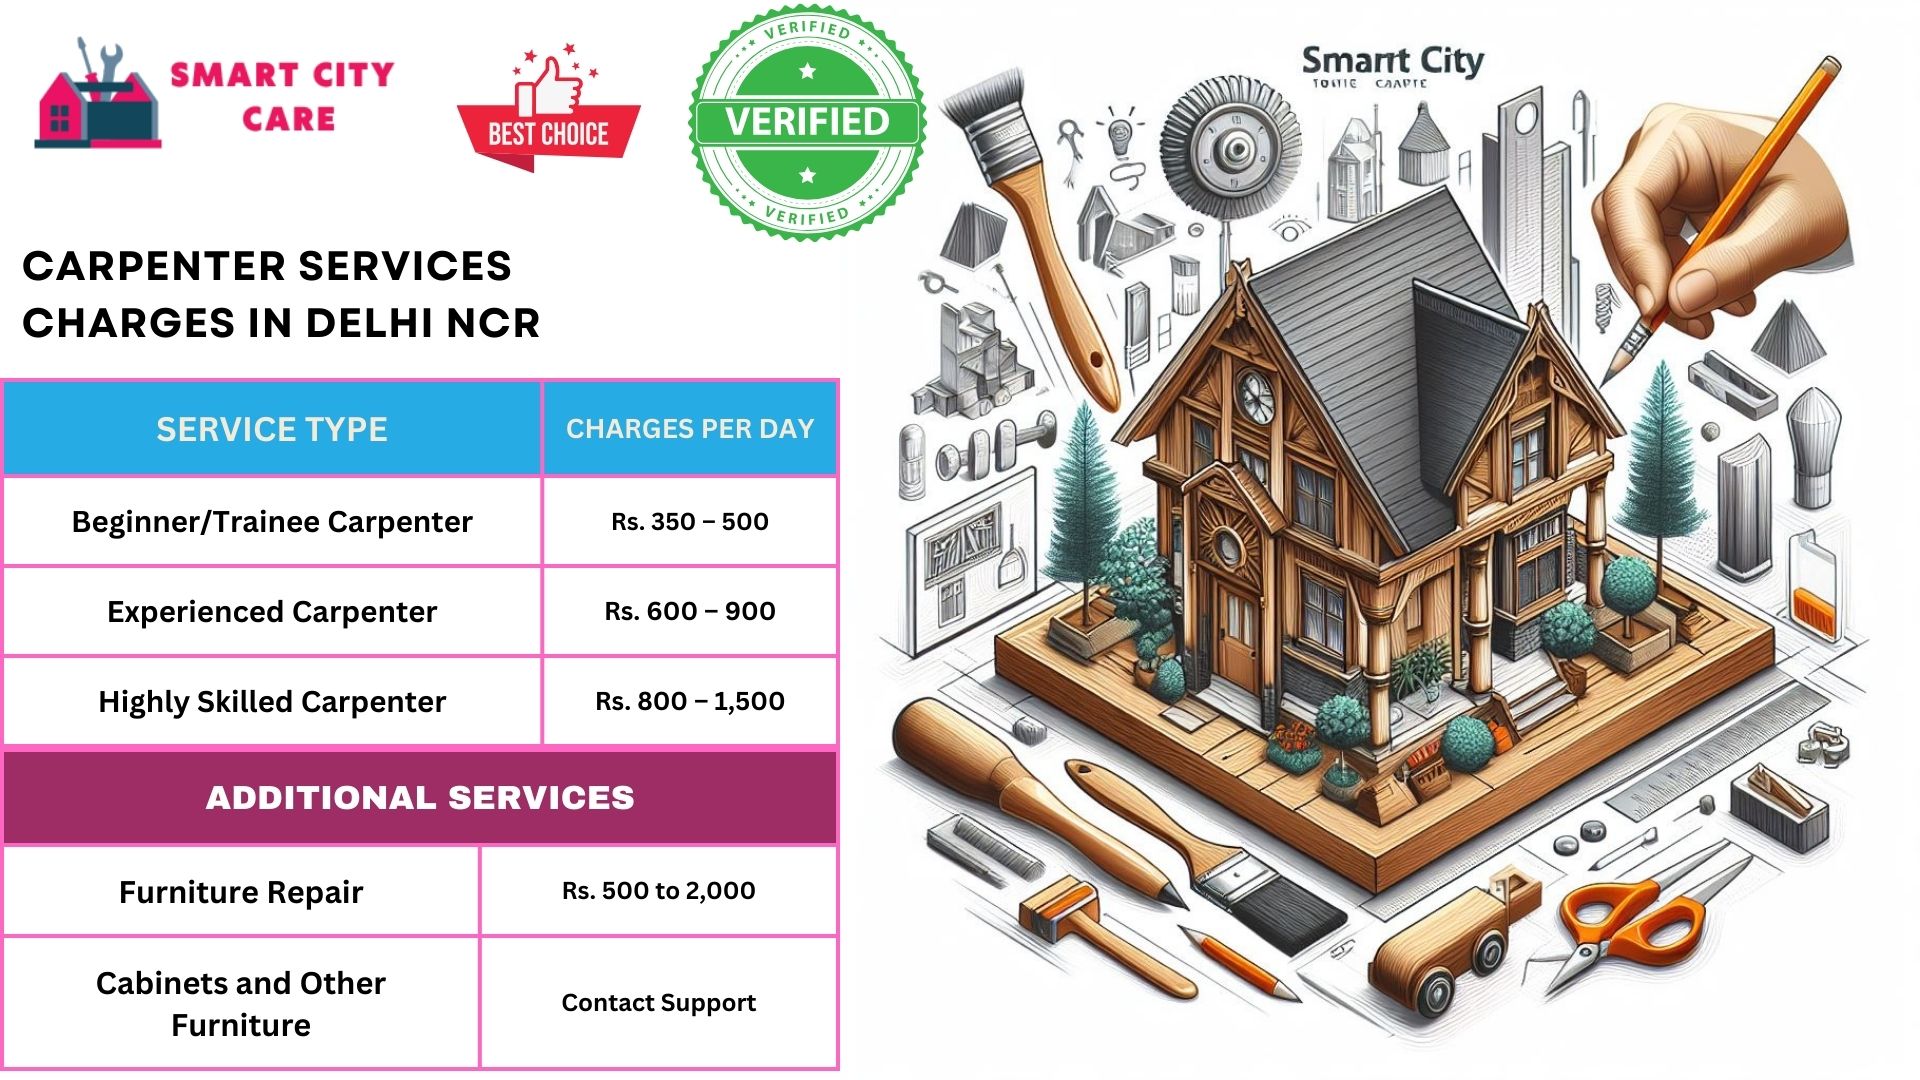 Carpentry Services Charges in Delhi NCR